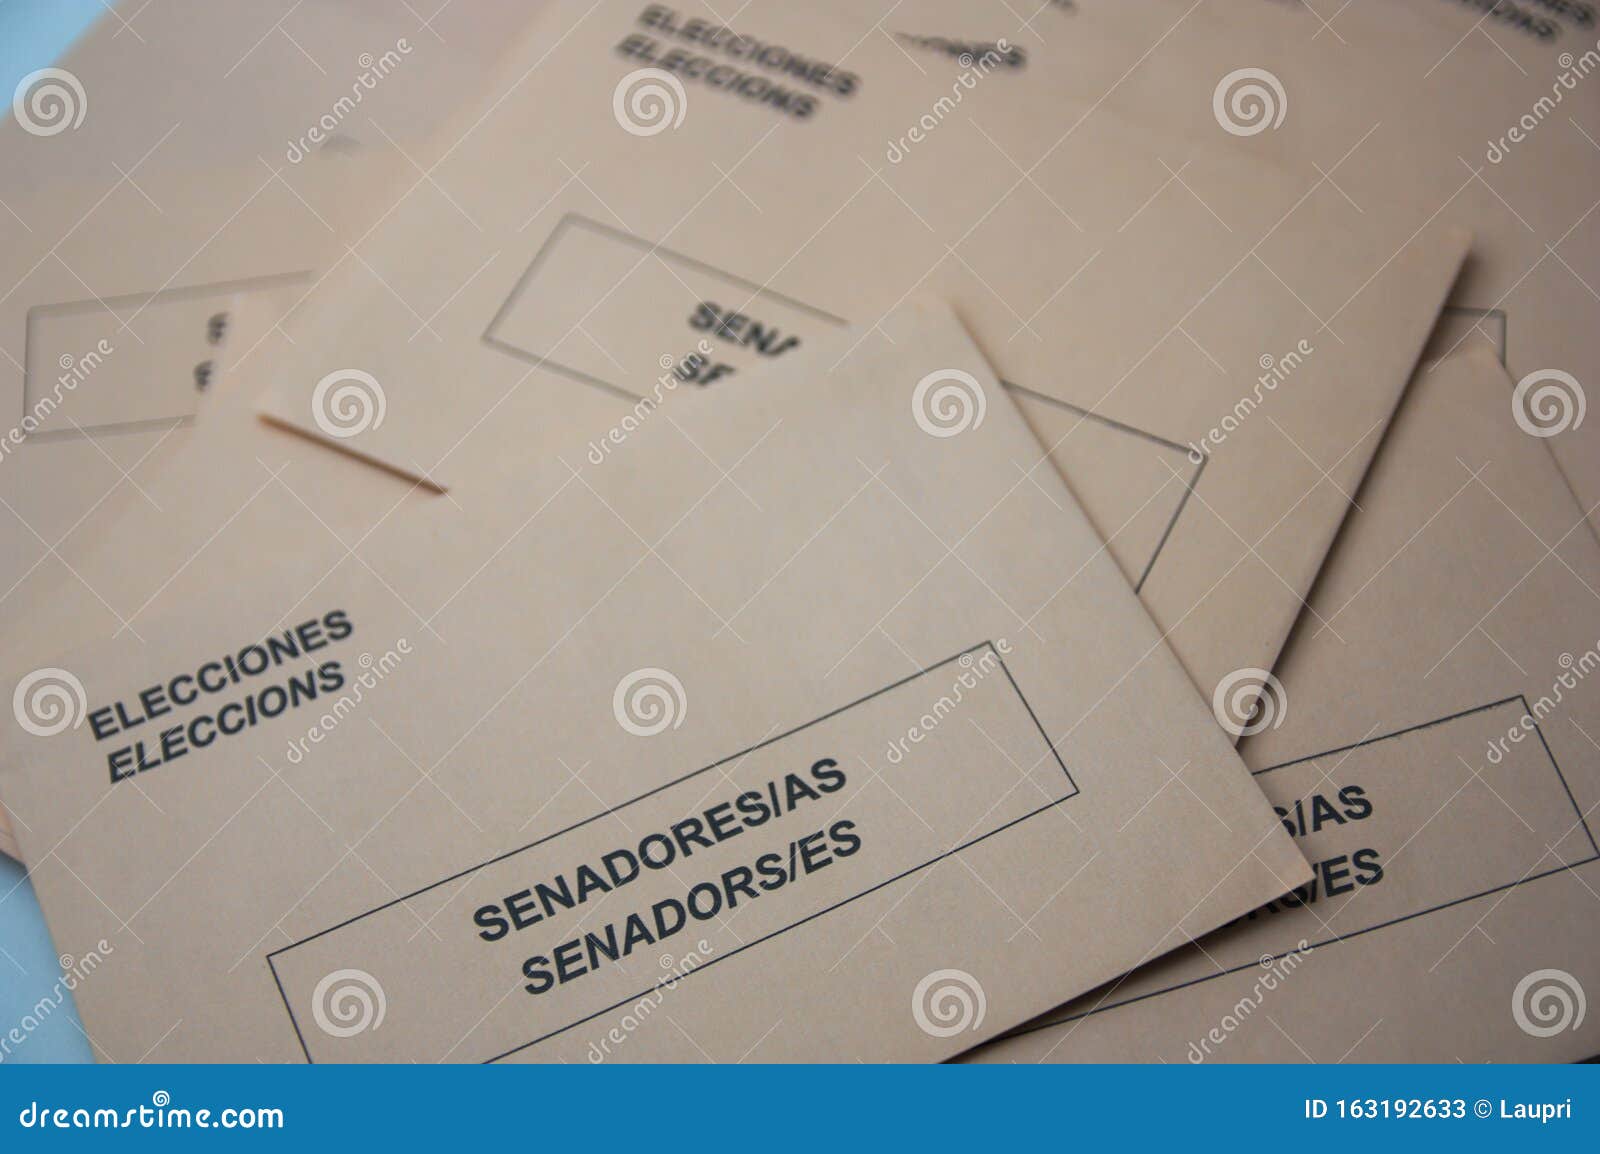 close-up of ballots for the election of senators in catalan and spanish